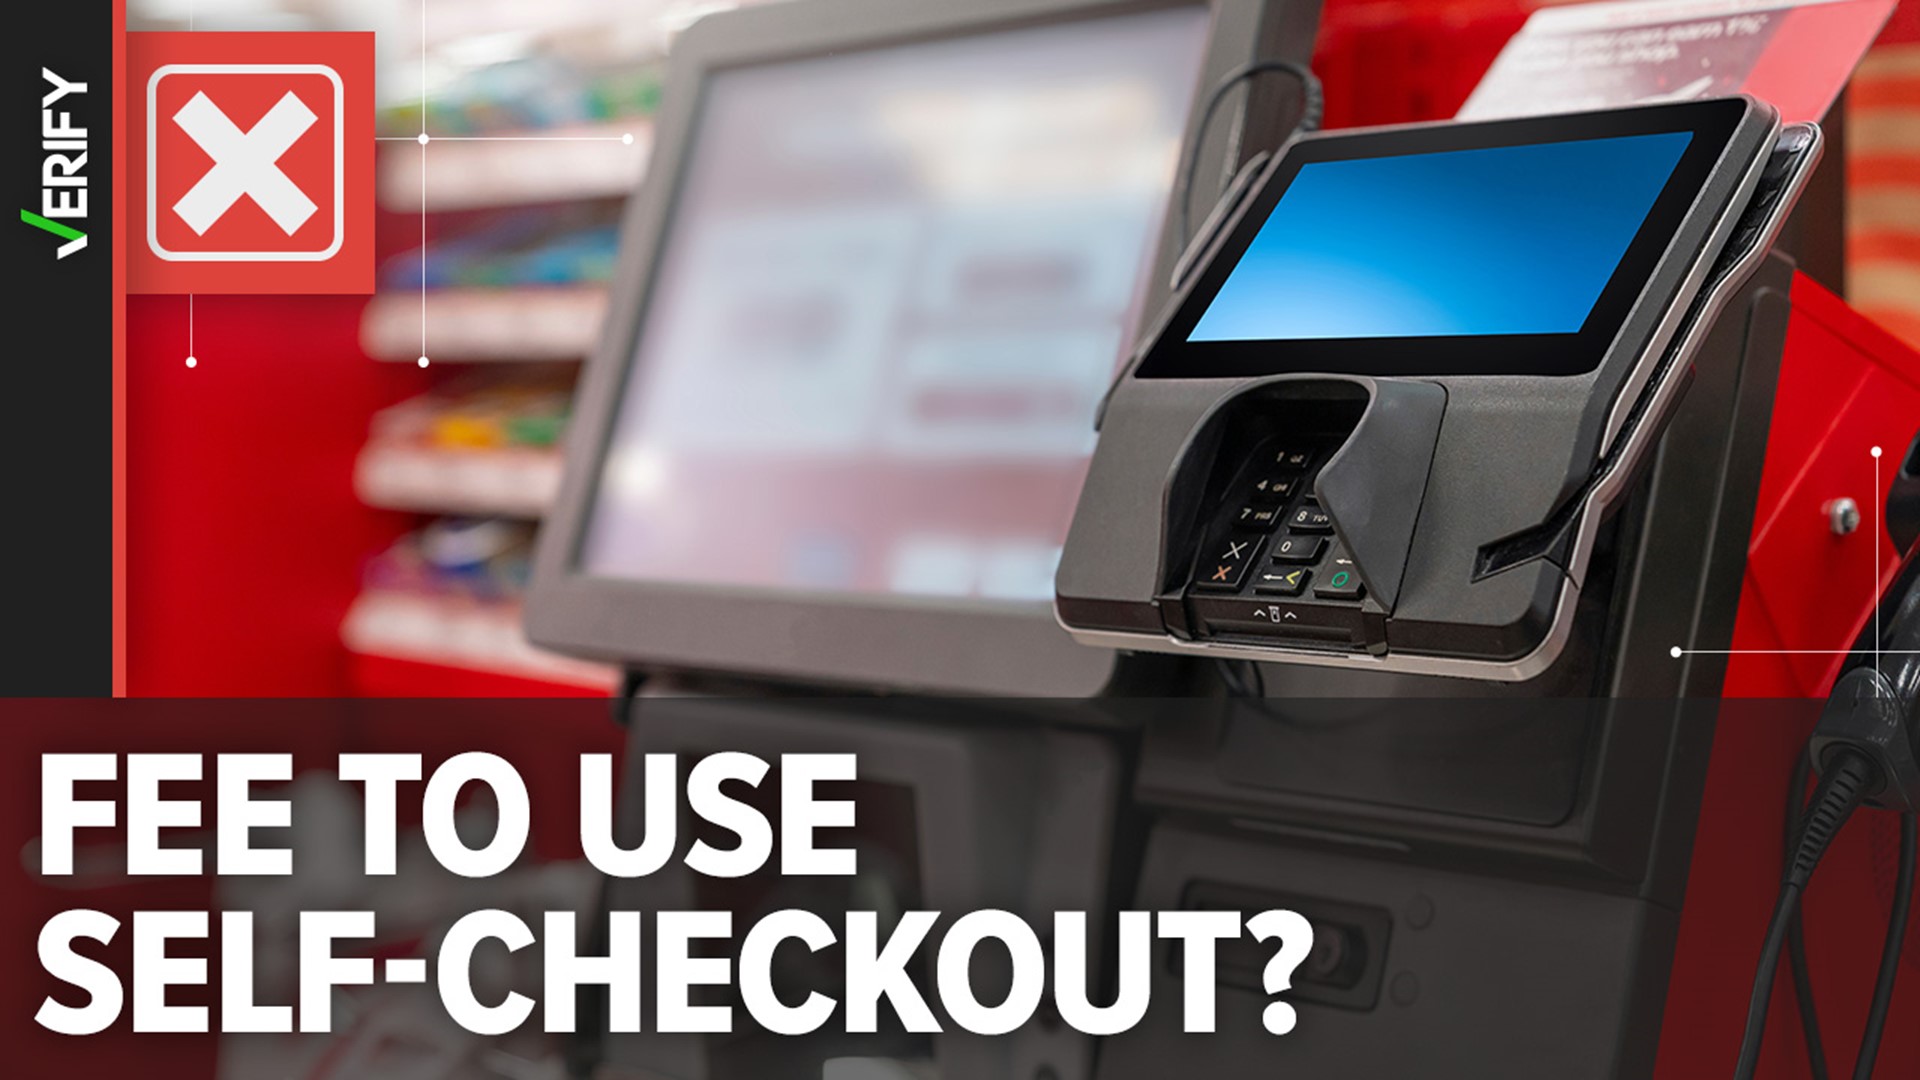 Posts online claim the stores are limiting self-checkout lanes to customers who pay for subscription services. Here’s what Walmart and Target told VERIFY.